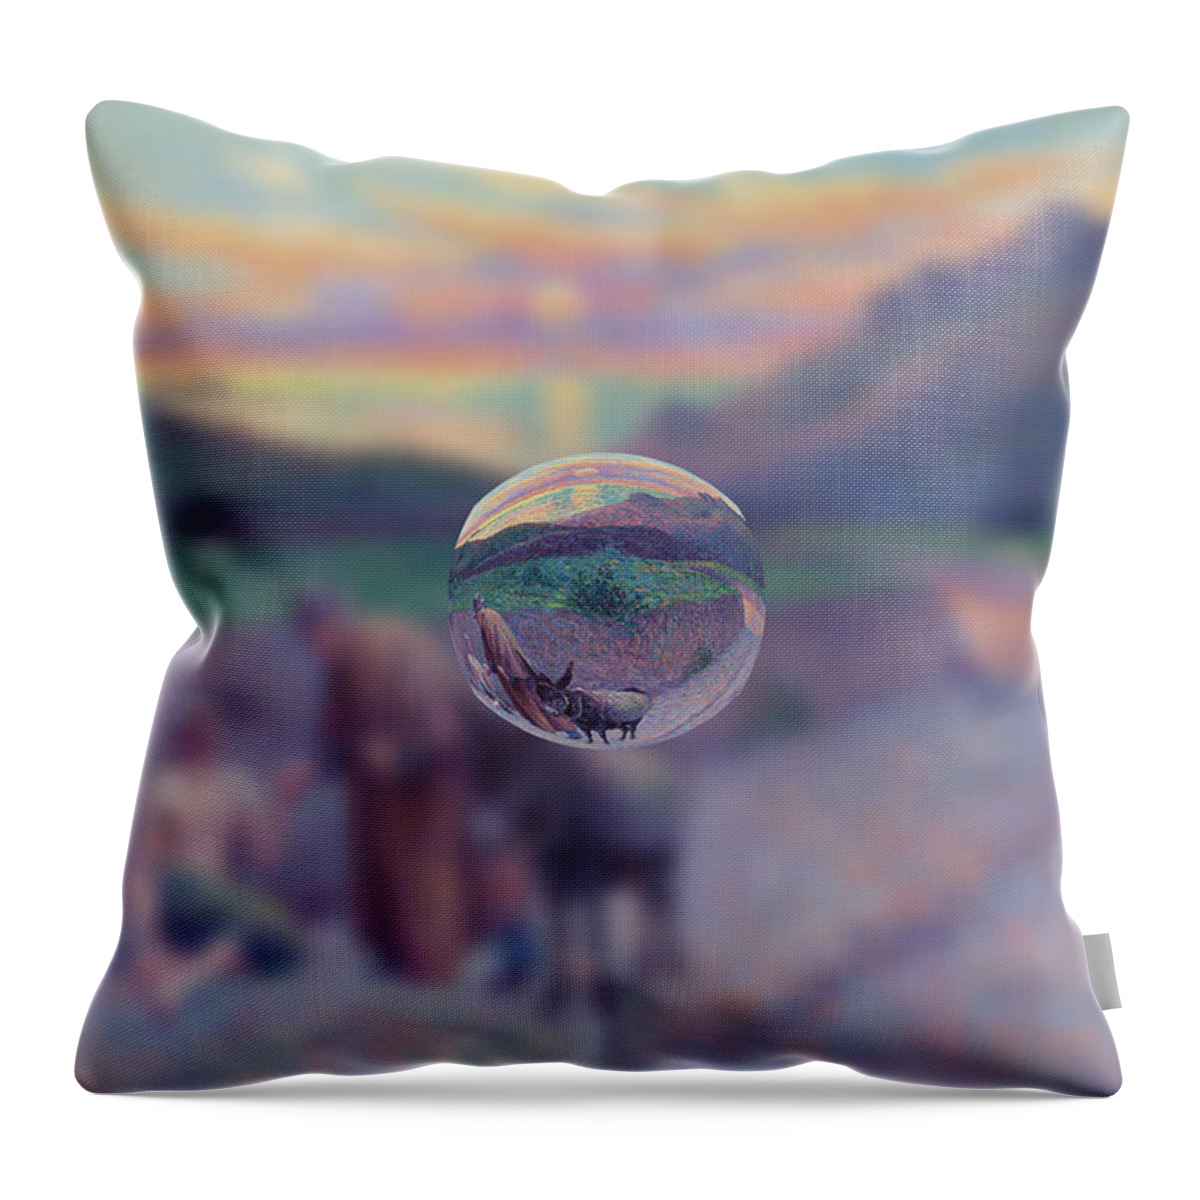 Abstract In The Living Room Throw Pillow featuring the digital art Sphere 10 Luce by David Bridburg